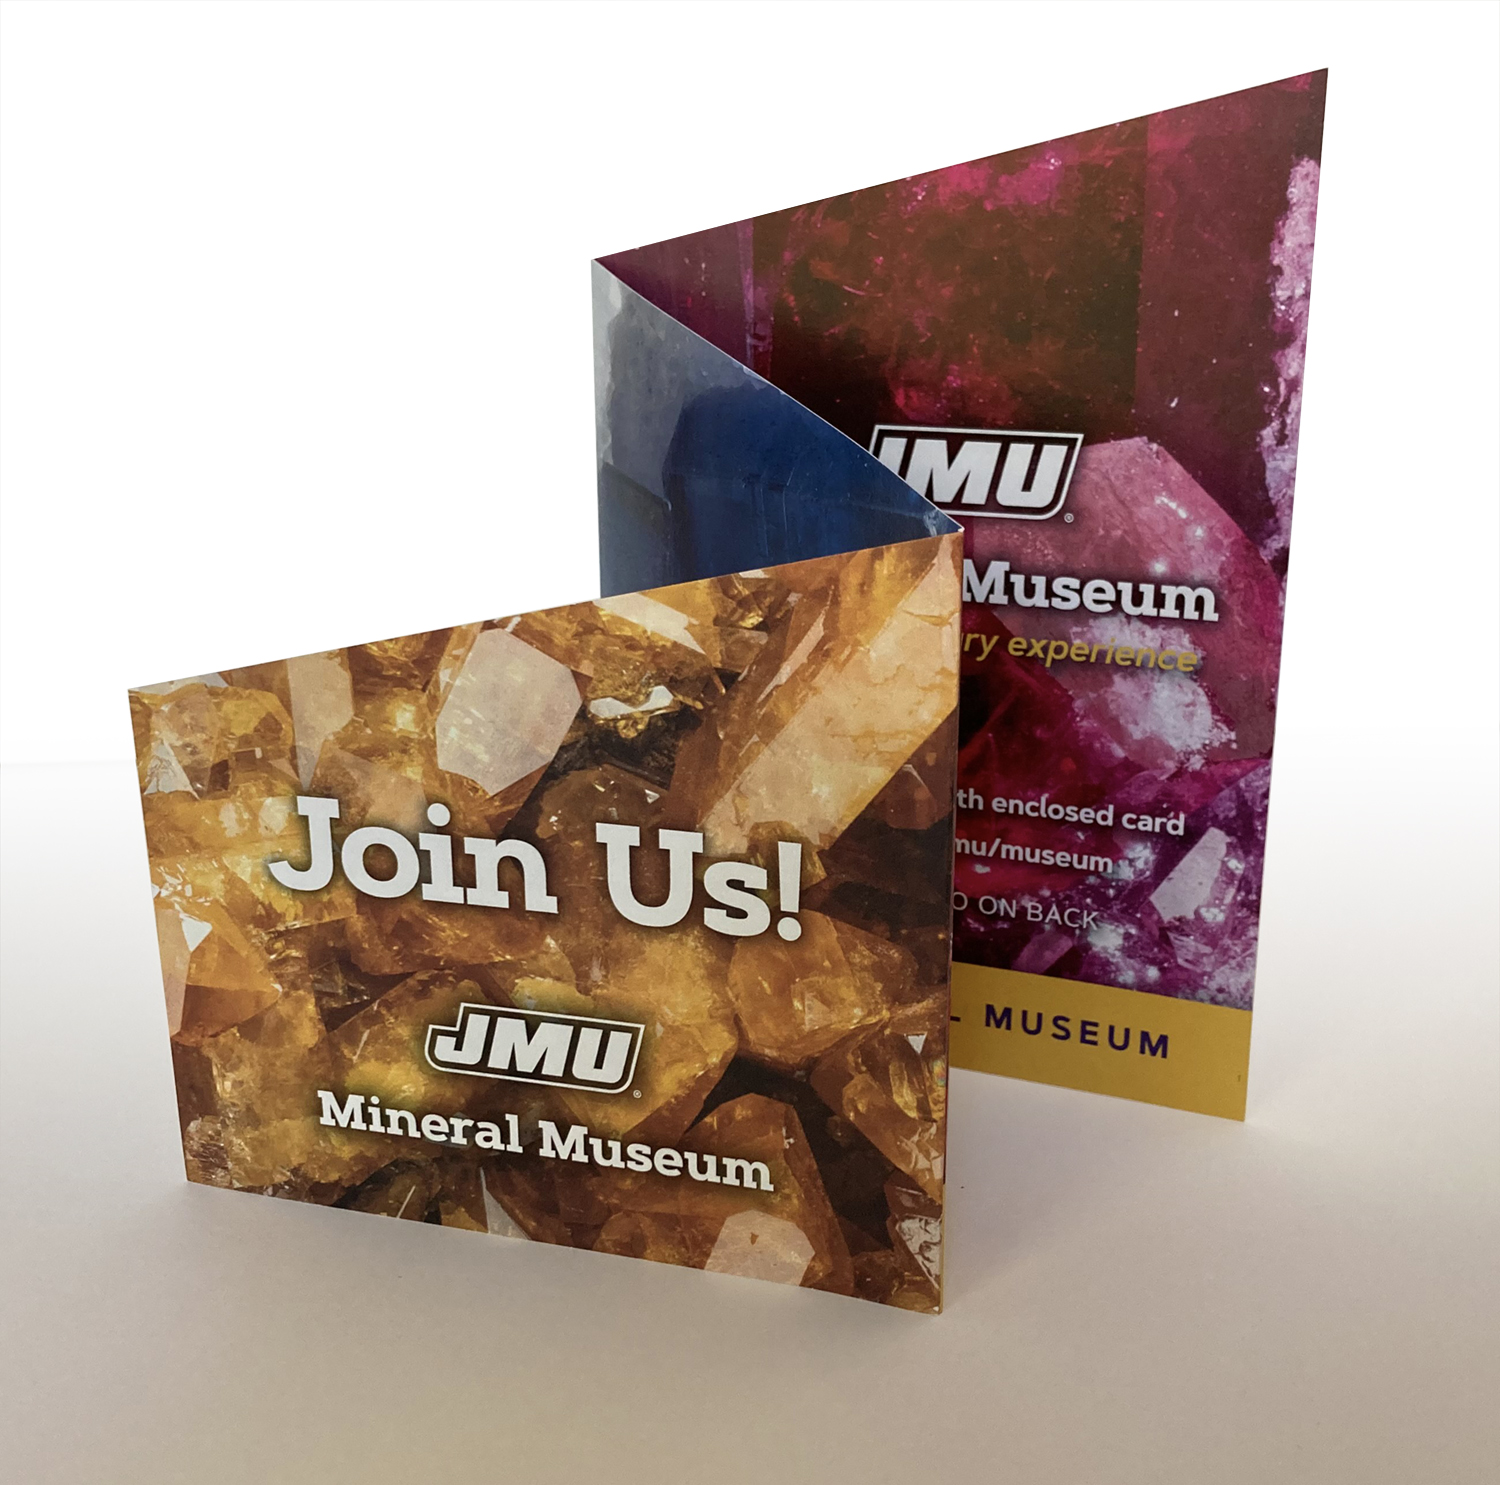 Mineral Museum invitation view 1